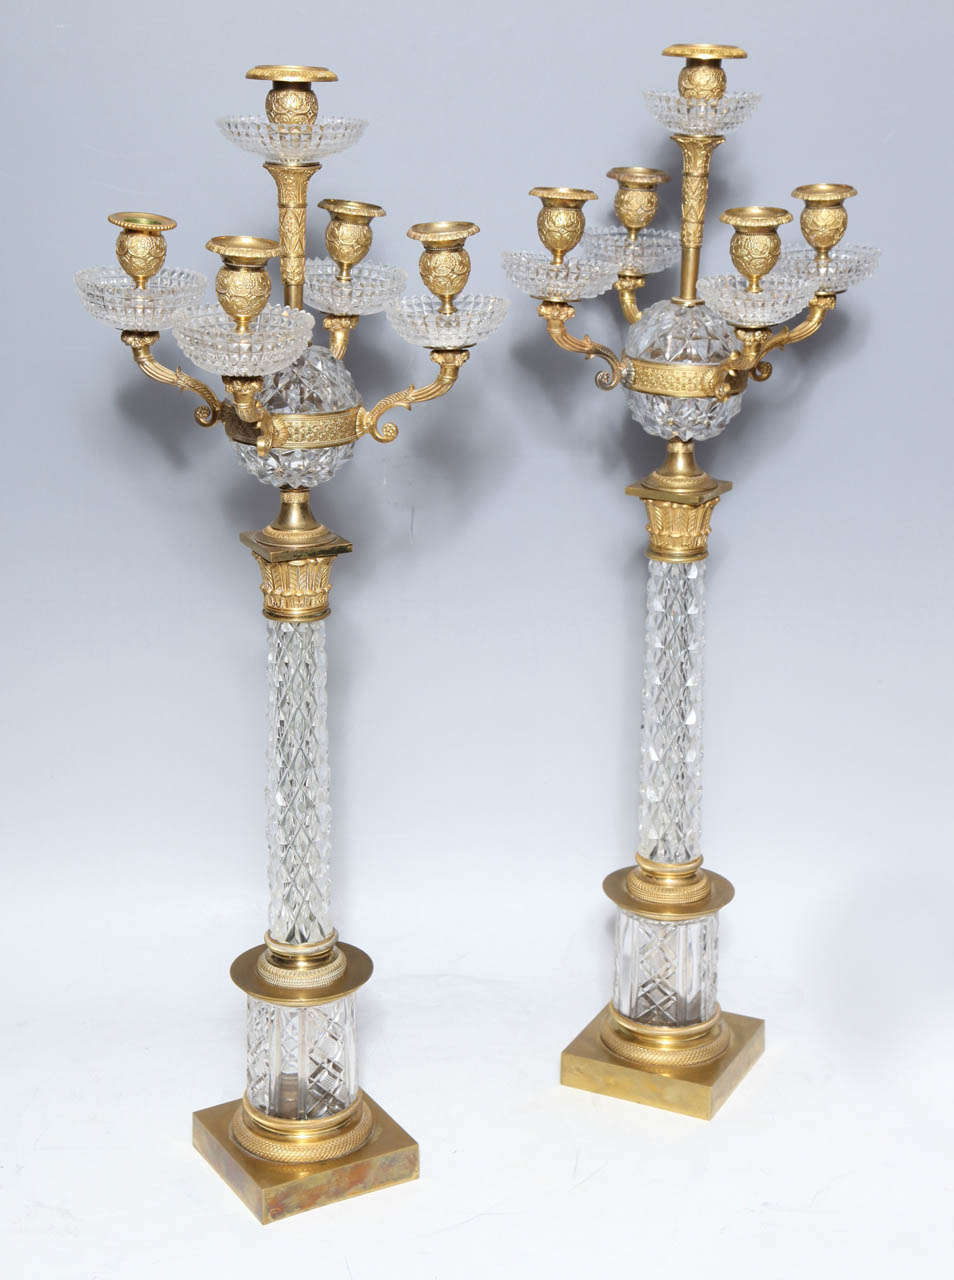 A pair of finely crafted Russian diamond-patterned cut-crystal five-light candelabra mounted and embellished with finely chased doré Bbonze mounts, from the early 1800s. These rare candelabra are attributed to the Imperial Russian Glass Manufactory,